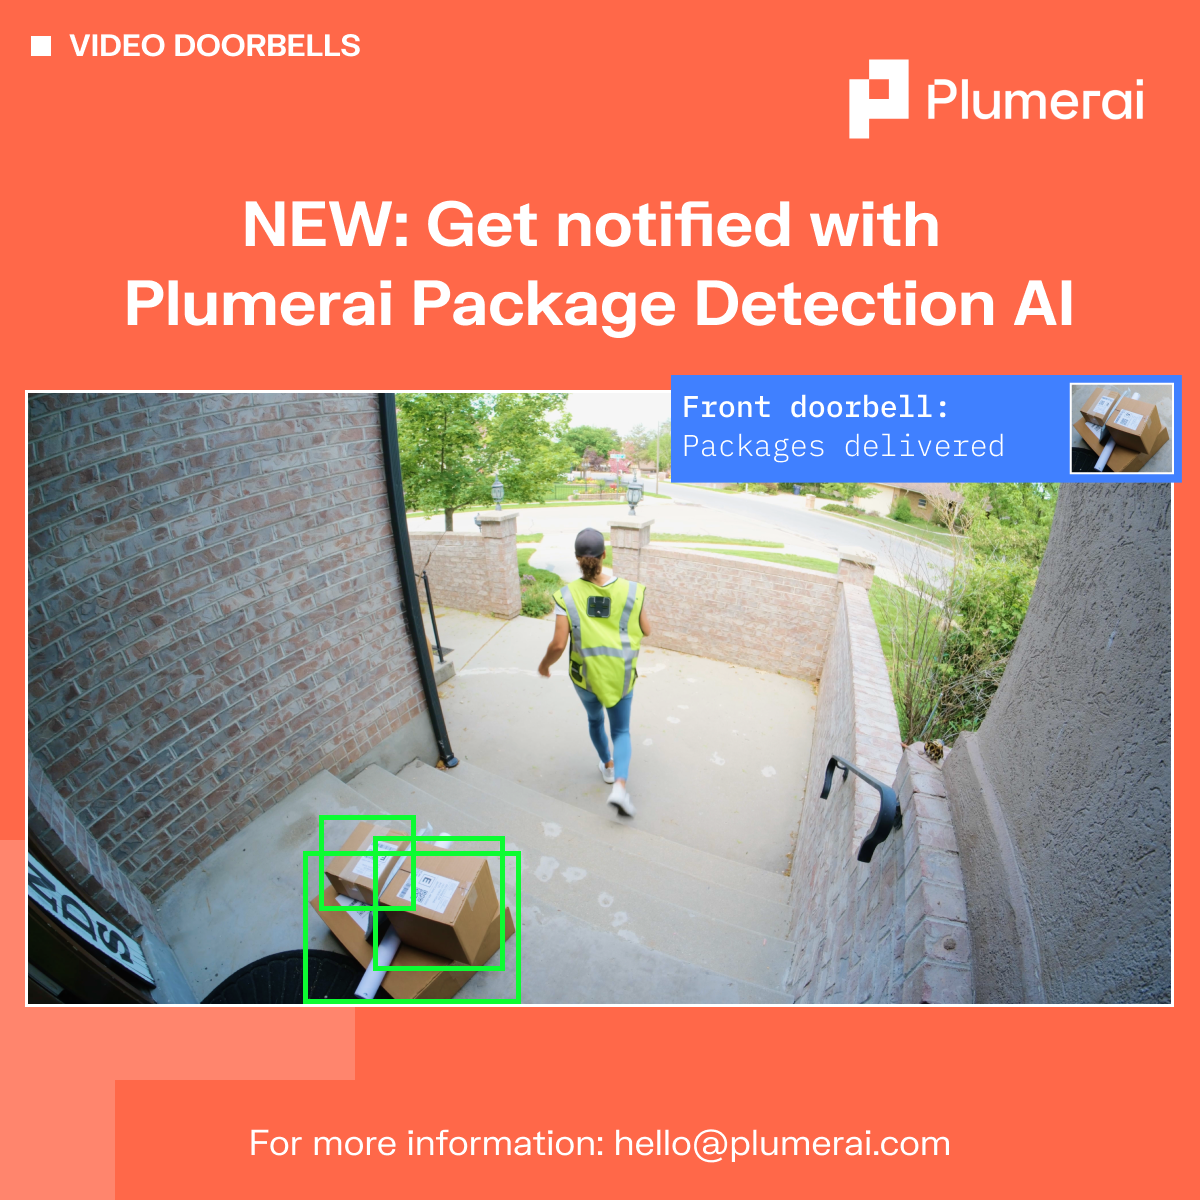 Get notified with Plumerai Package Detection AI